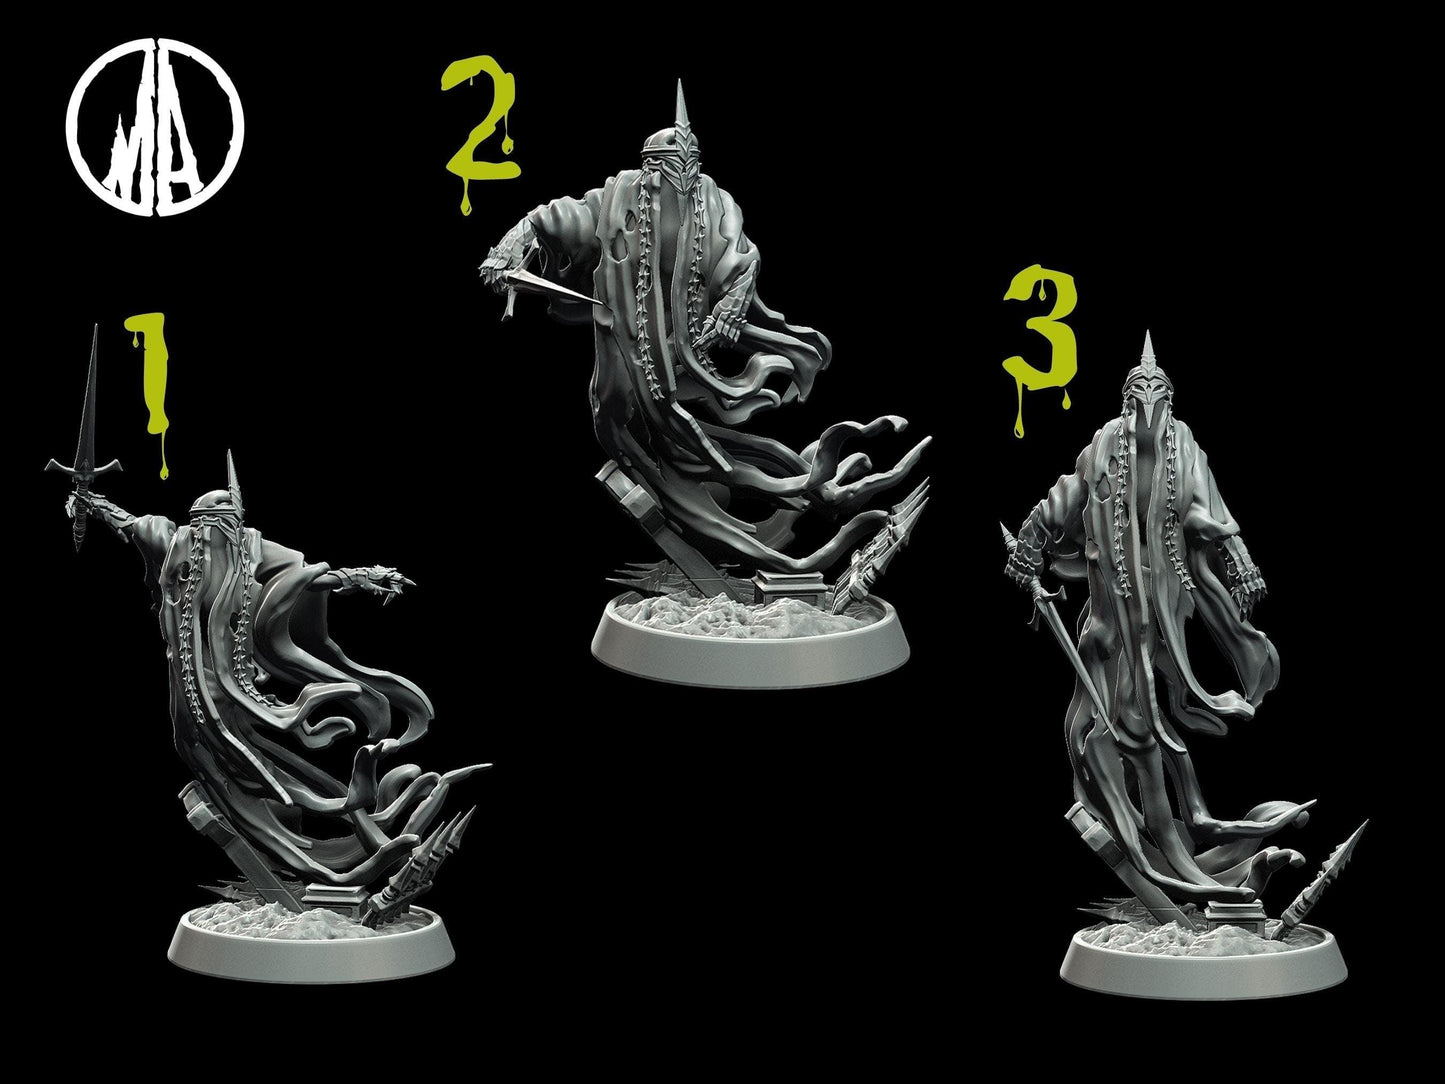 DnD Damned Spirit Miniature - 3 Poses - 28mm scale Tabletop gaming DnD Miniature Dungeons and Dragons, ttrpg dnd 5e - Plague Miniatures shop for DnD Miniatures